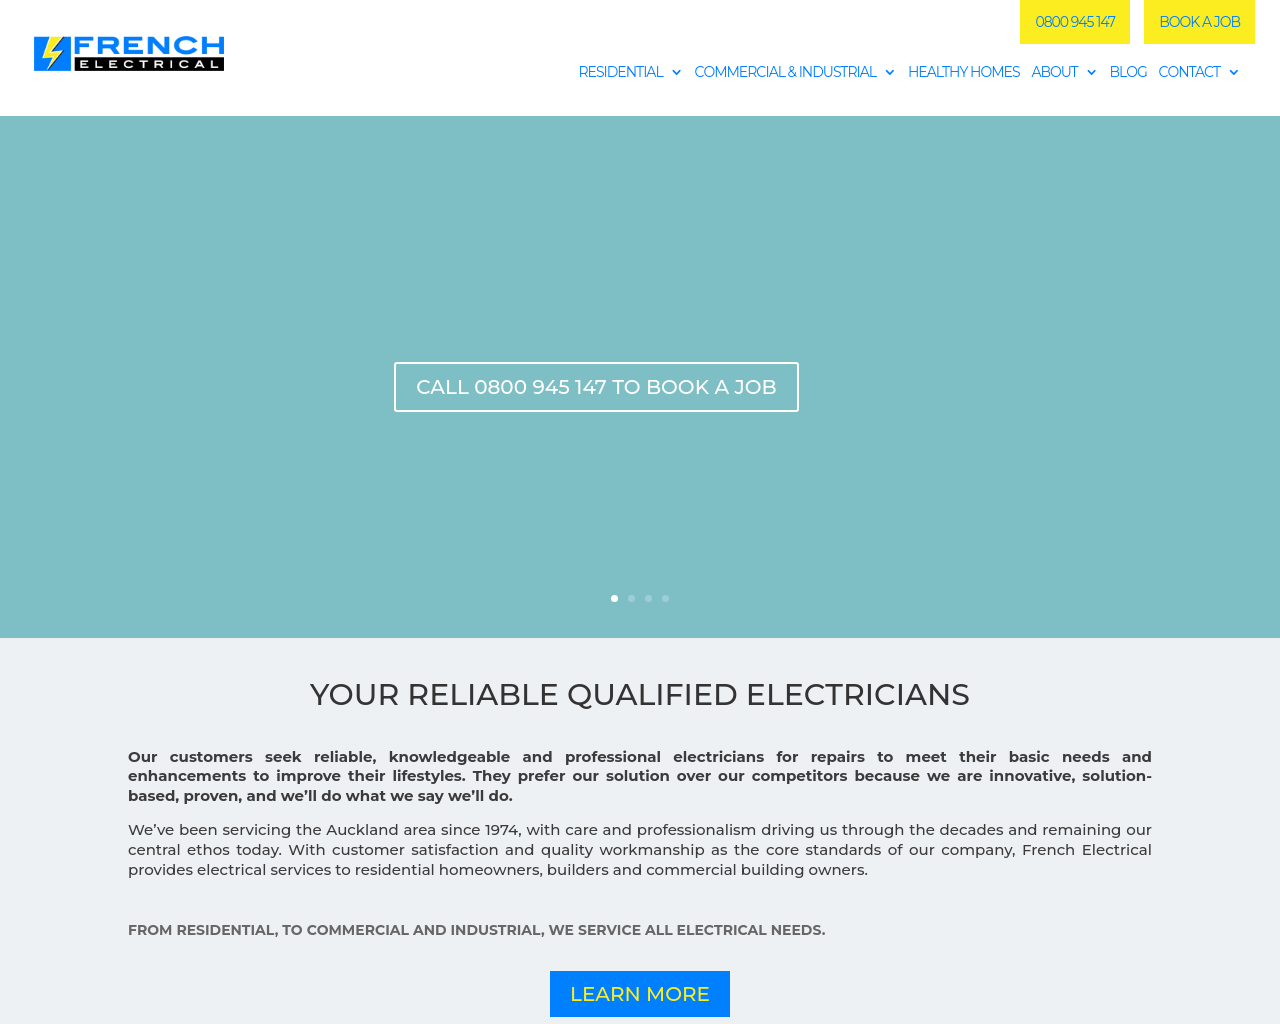 frenchelectrical.co.nz